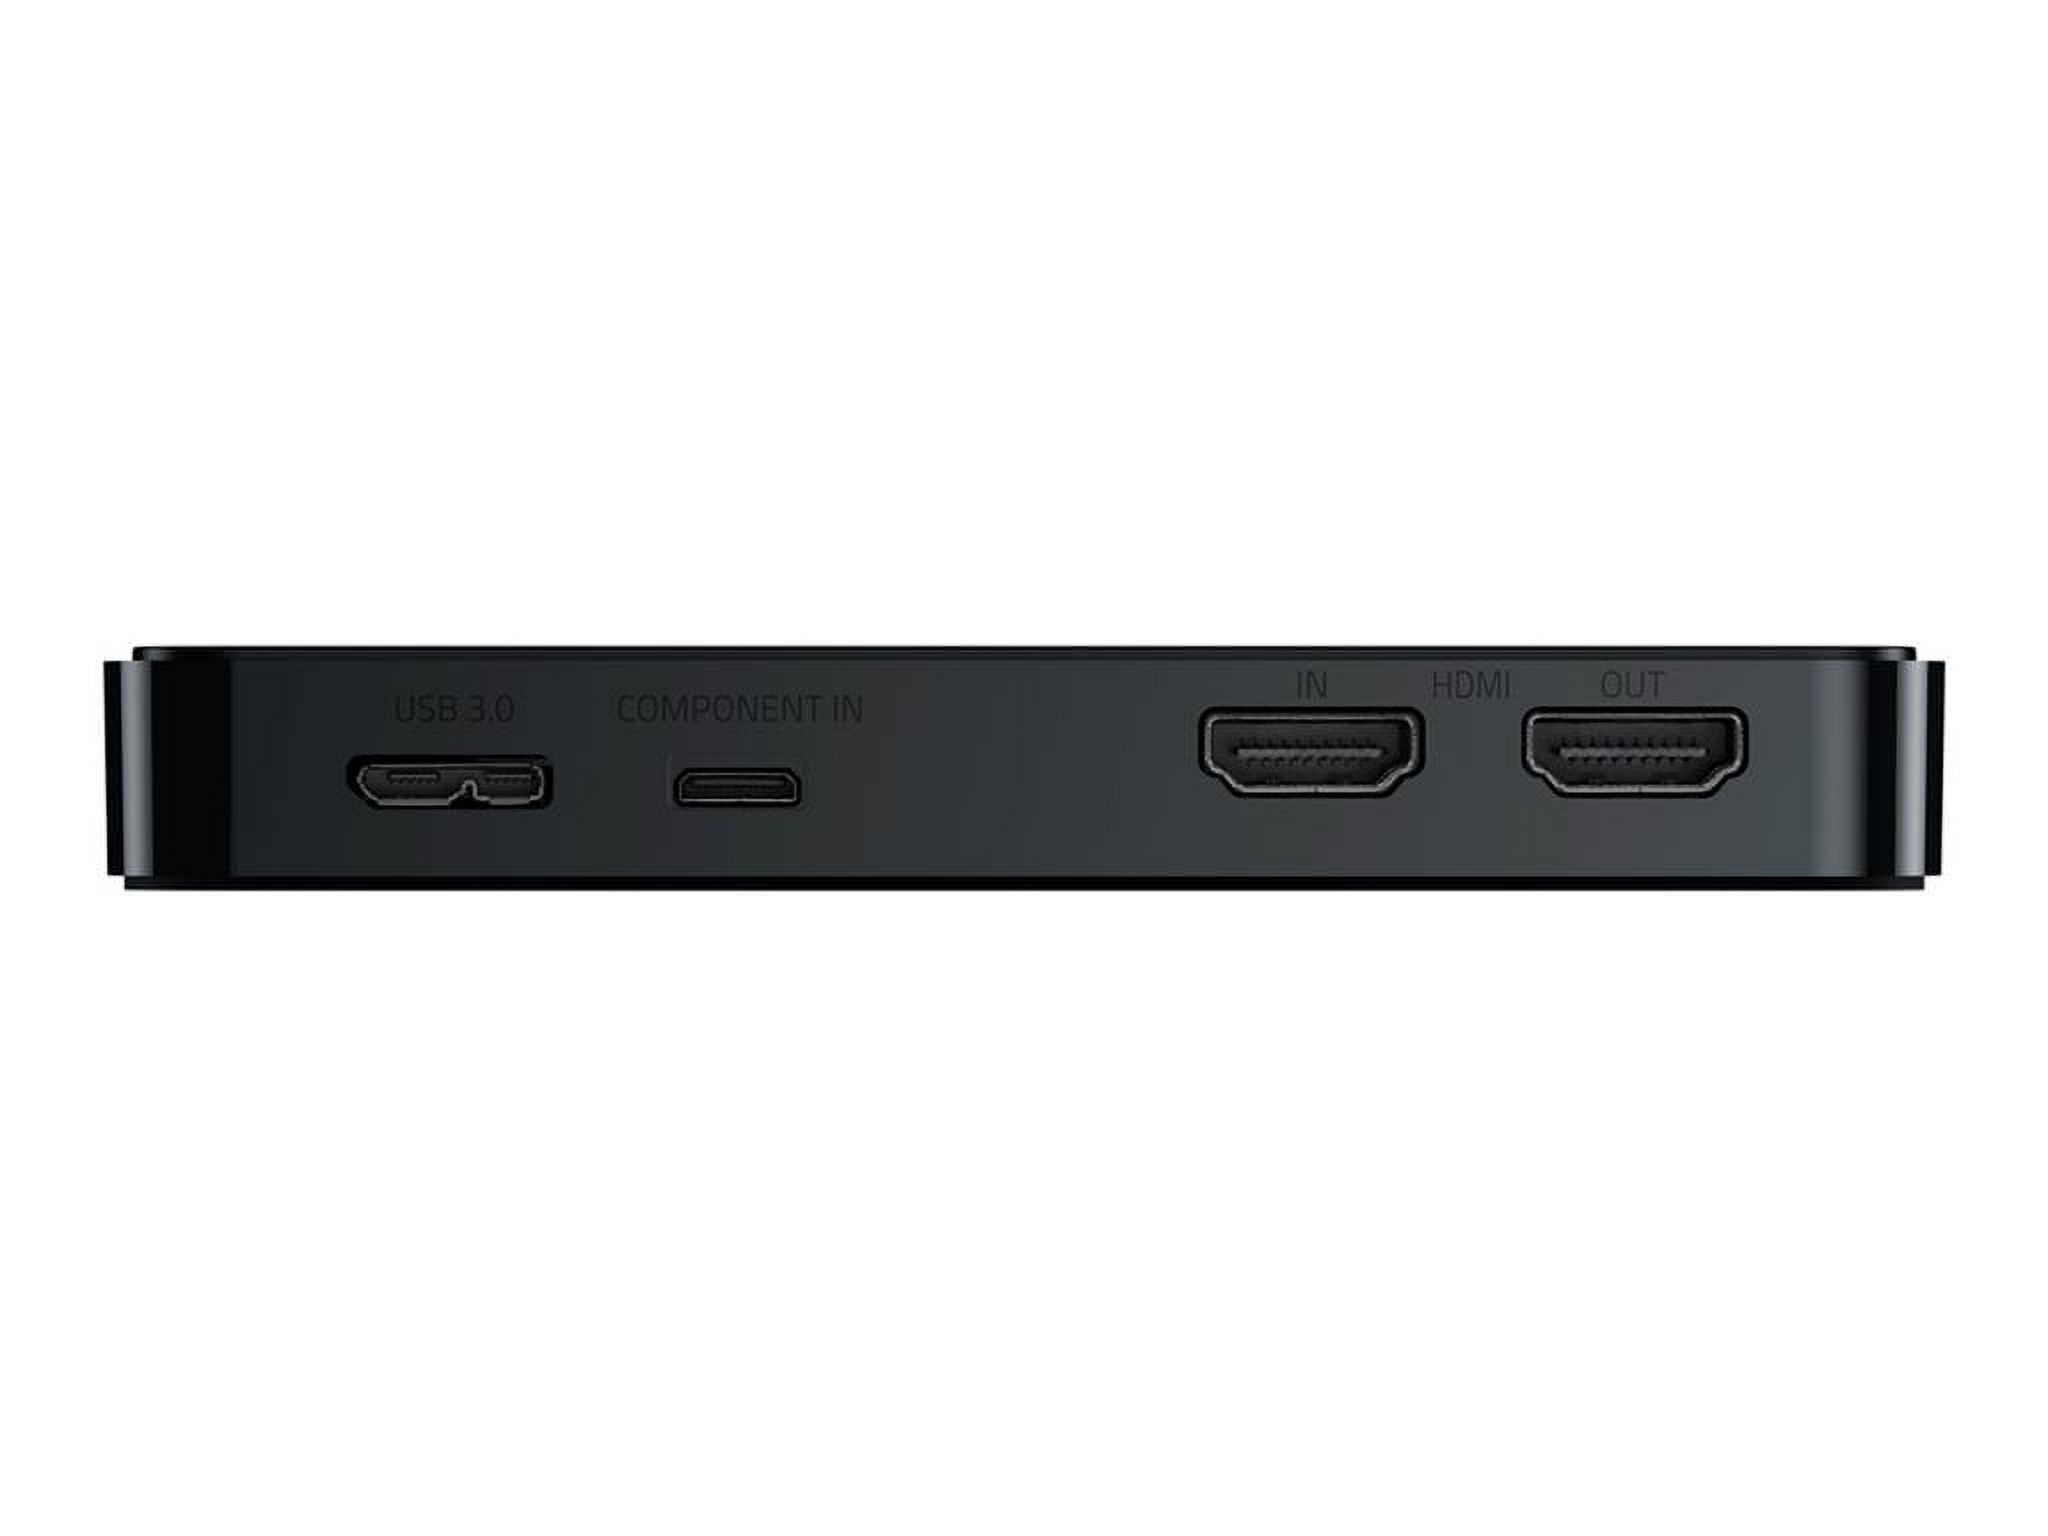 Razer Ripsaw USB 3.0 Game Stream and Capture Card for PC, PlayStation 4 or 3, Xbox One or 360, or Wii U, Uncompressed HD 1080p 60fps - image 4 of 50